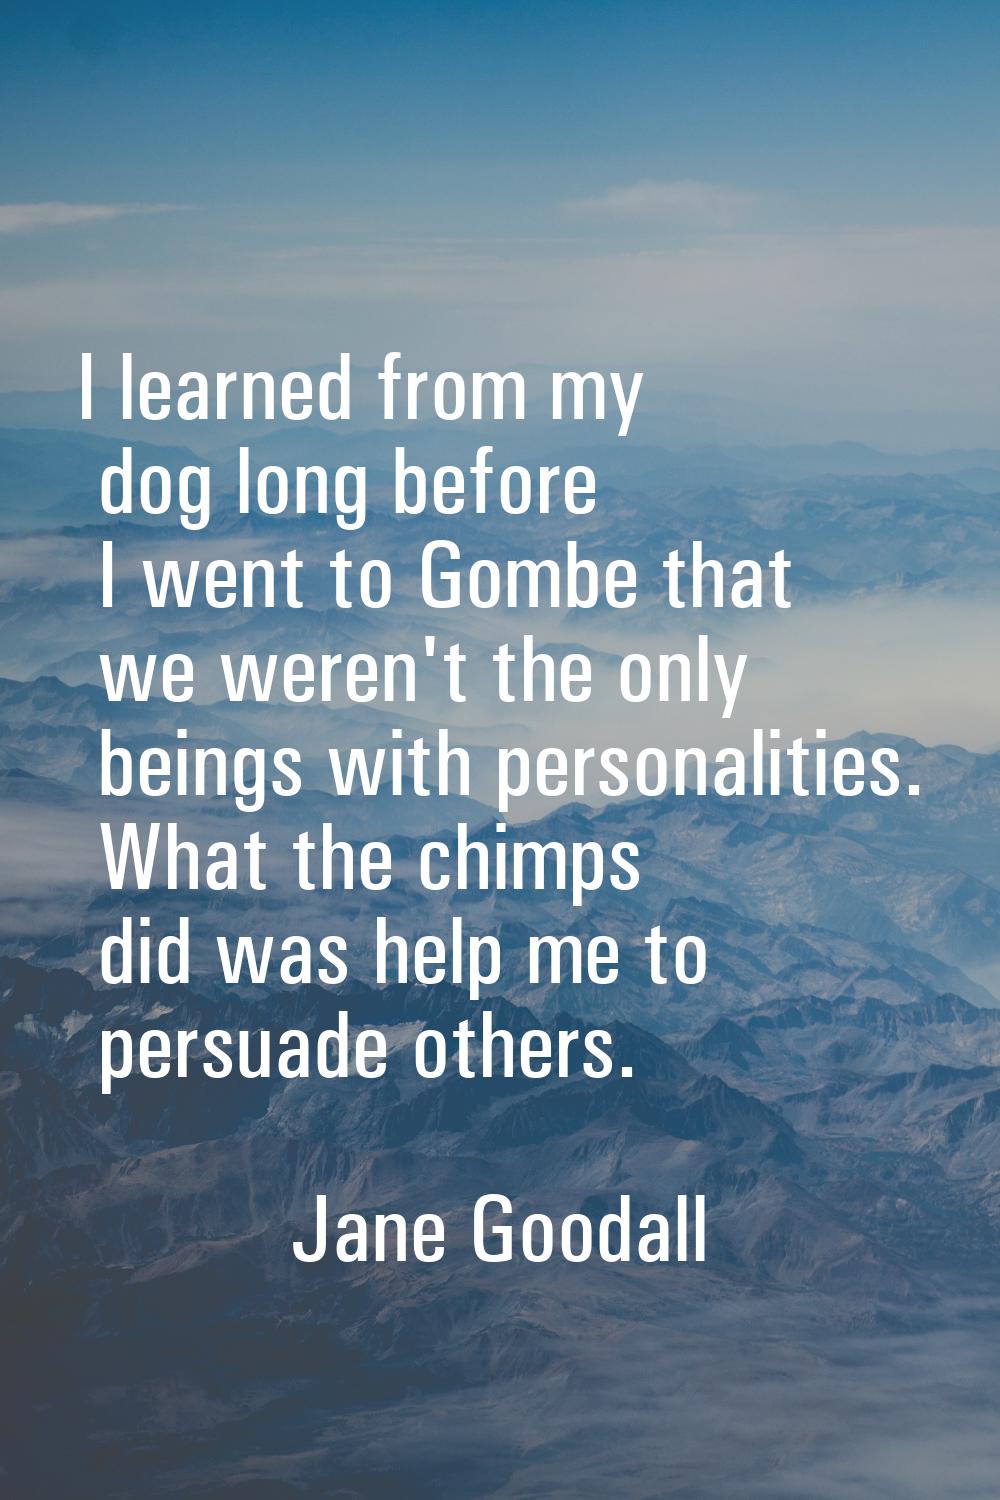 I learned from my dog long before I went to Gombe that we weren't the only beings with personalitie